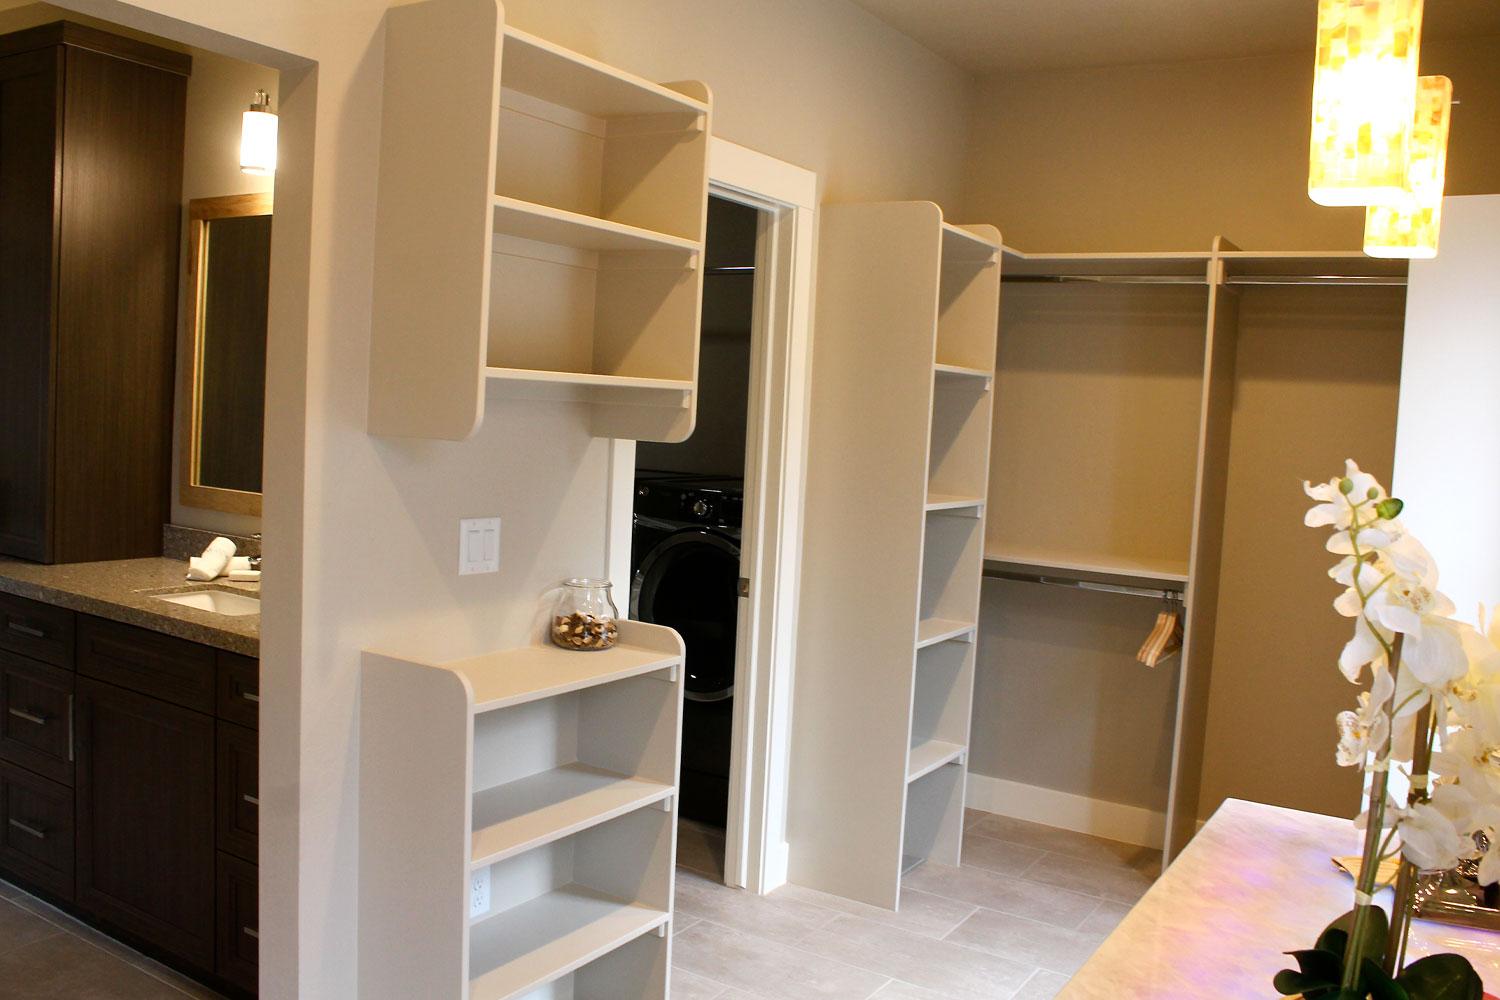 built in shelving and storage in the master bedroom walk in closet